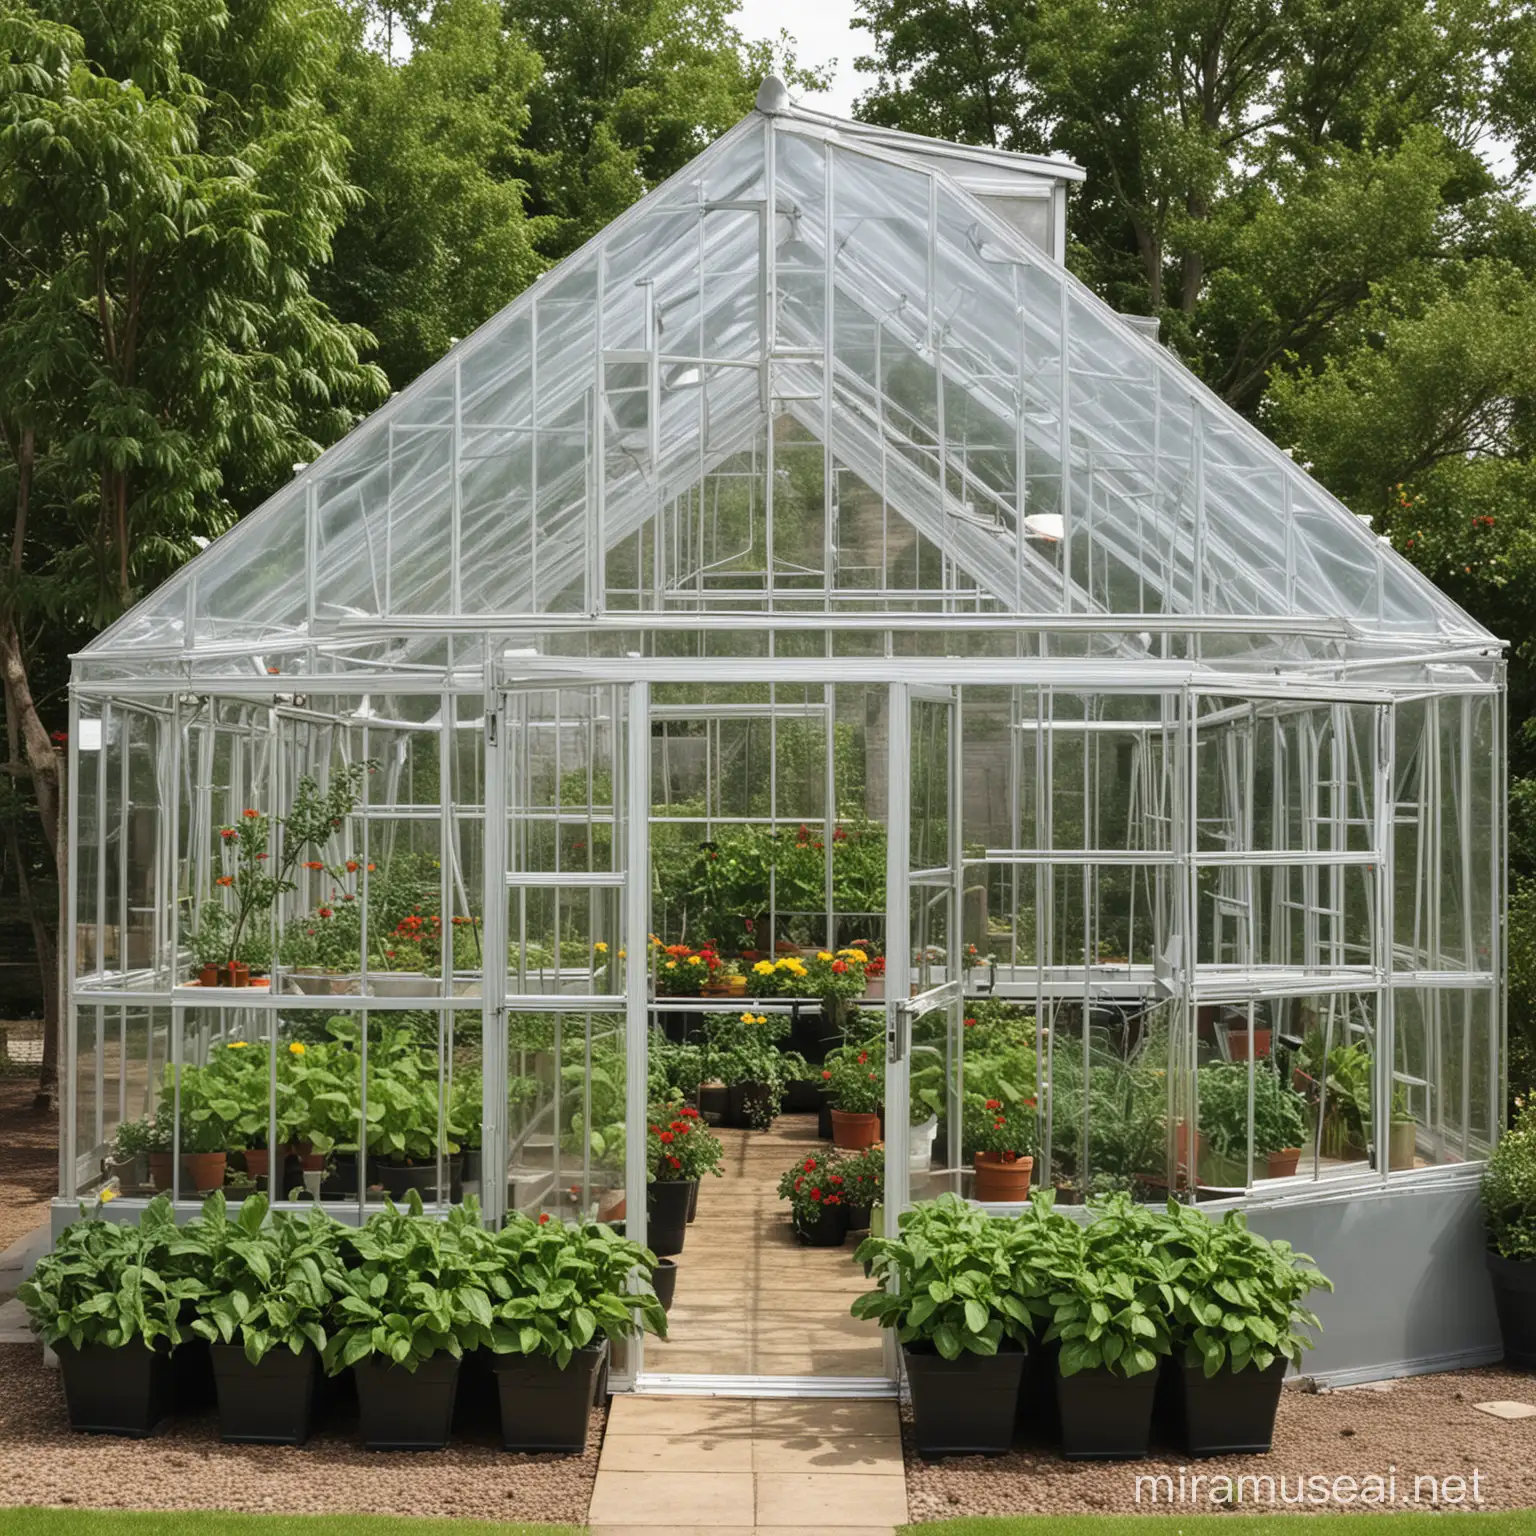 Futuristic Greenhouse Designs Inspiring Innovation for Sustainable Agriculture